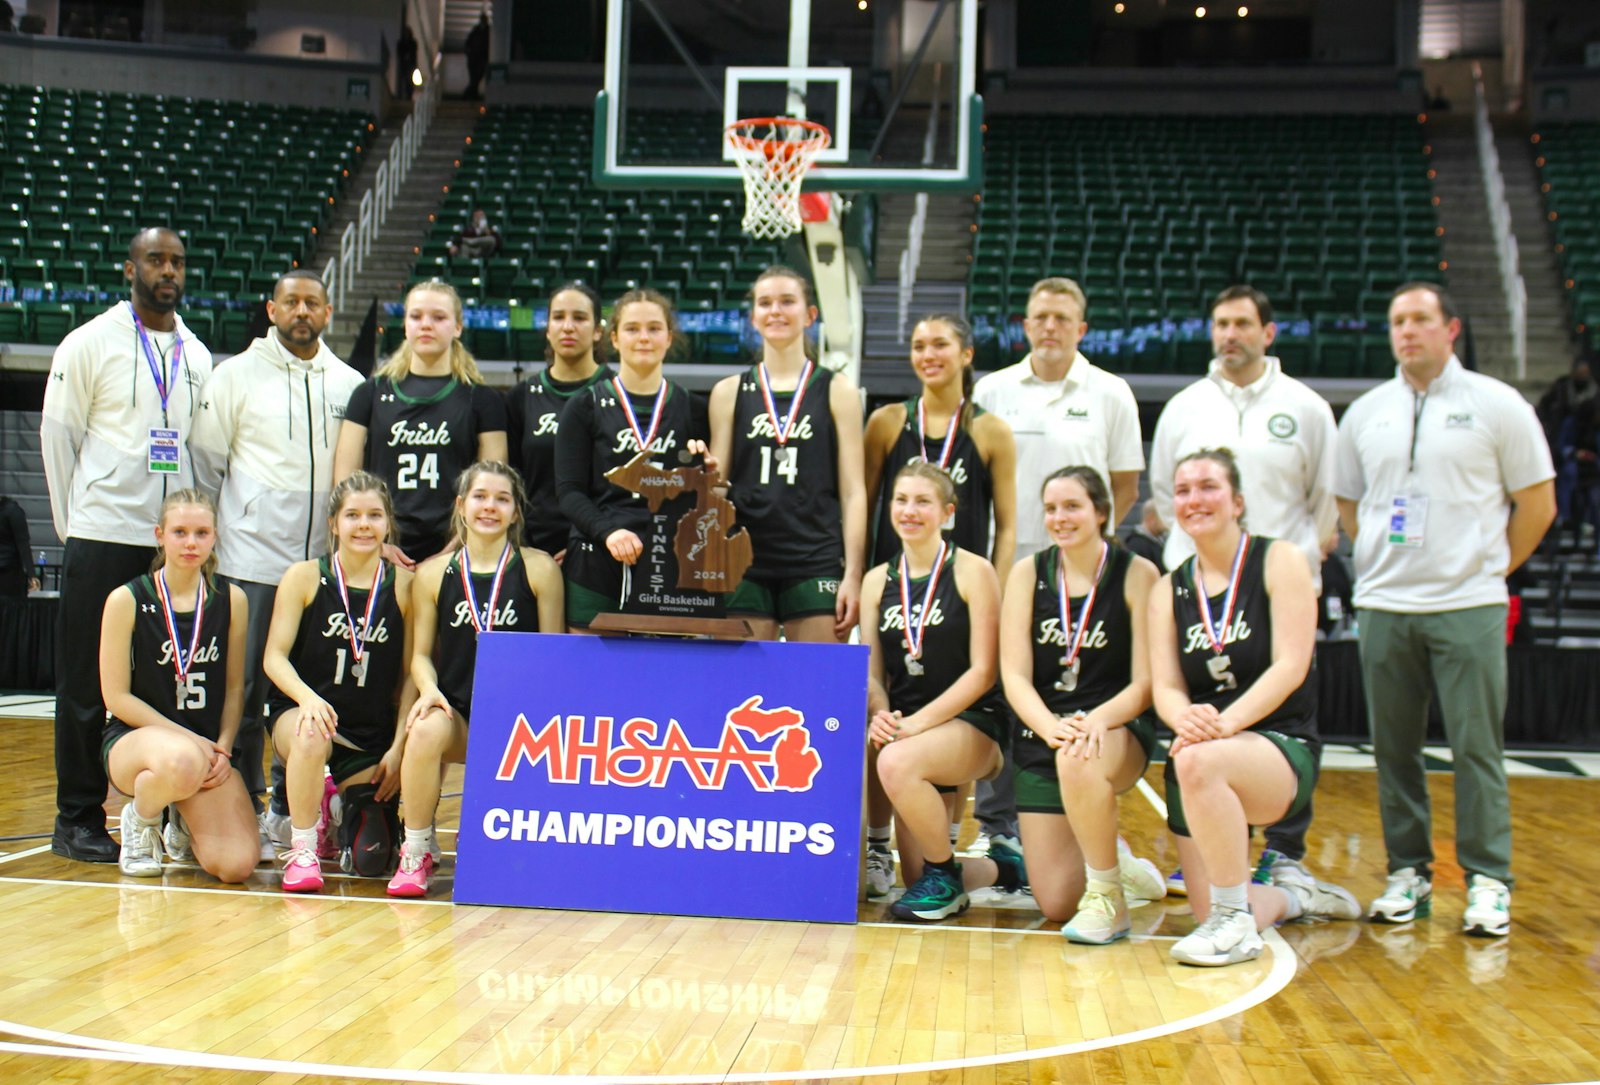 Ann Arbor Fr. Gabriel Richard’s team took home the Division 2 state runner-up trophy after being defeated by Detroit Edison, 41-33, in the championship game March 23 at Michigan State University. It was the Fighting Irish’ only loss of the season after 28 wins.